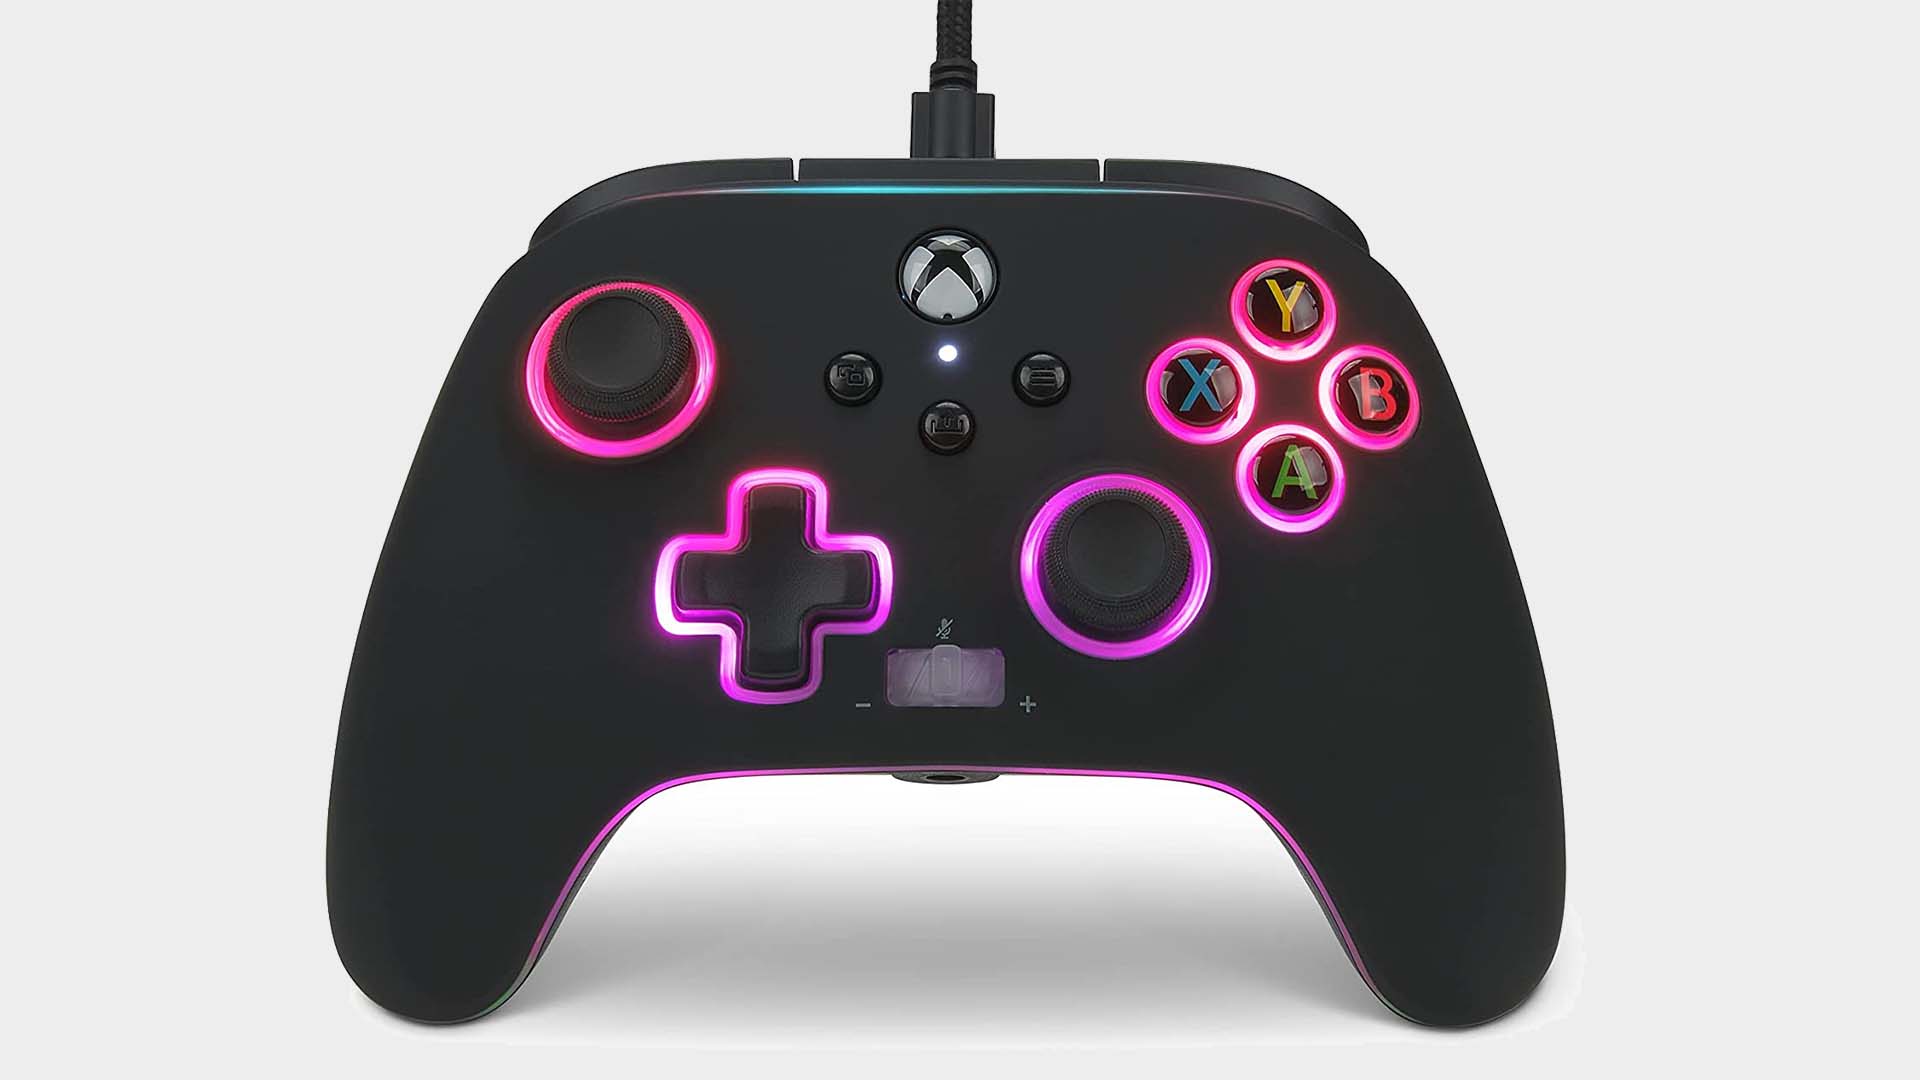 PowerA Spectra Infinity Enhanced controller pictured from various angles with lighting enabled.